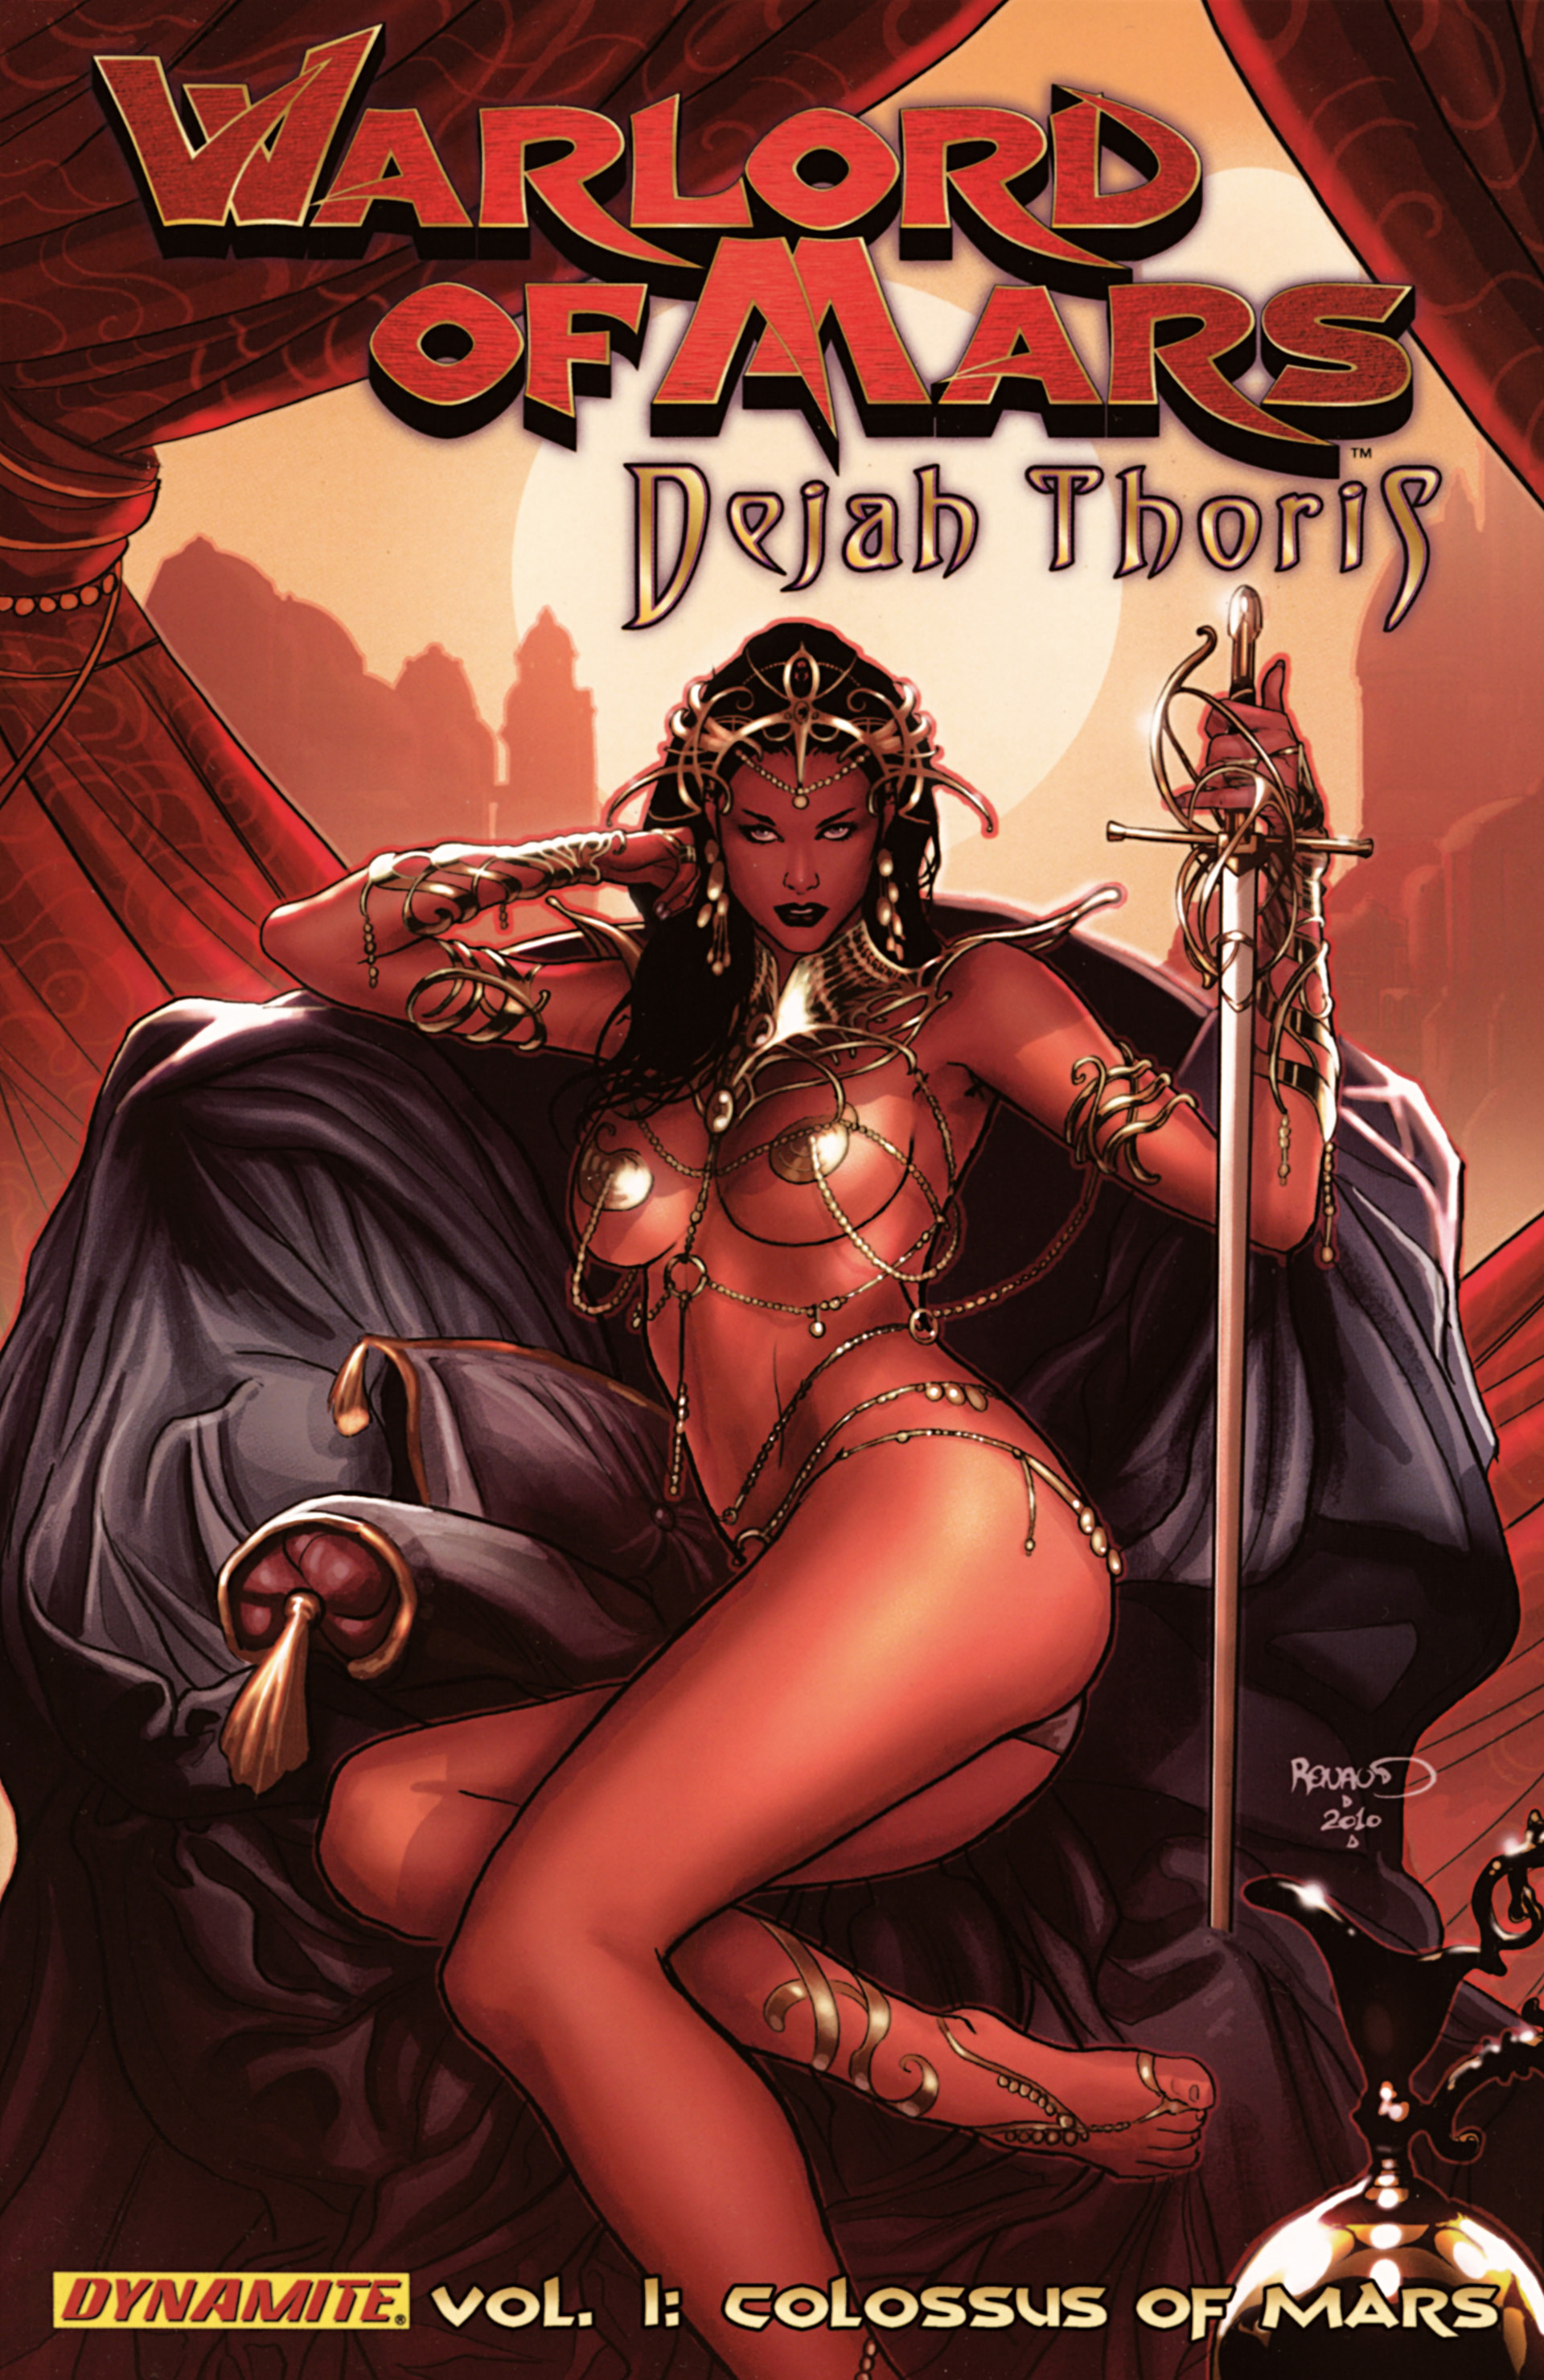 Warlord of Mars - Dejah Thoris Vol 1 - The Colossus of Mars by Renaut